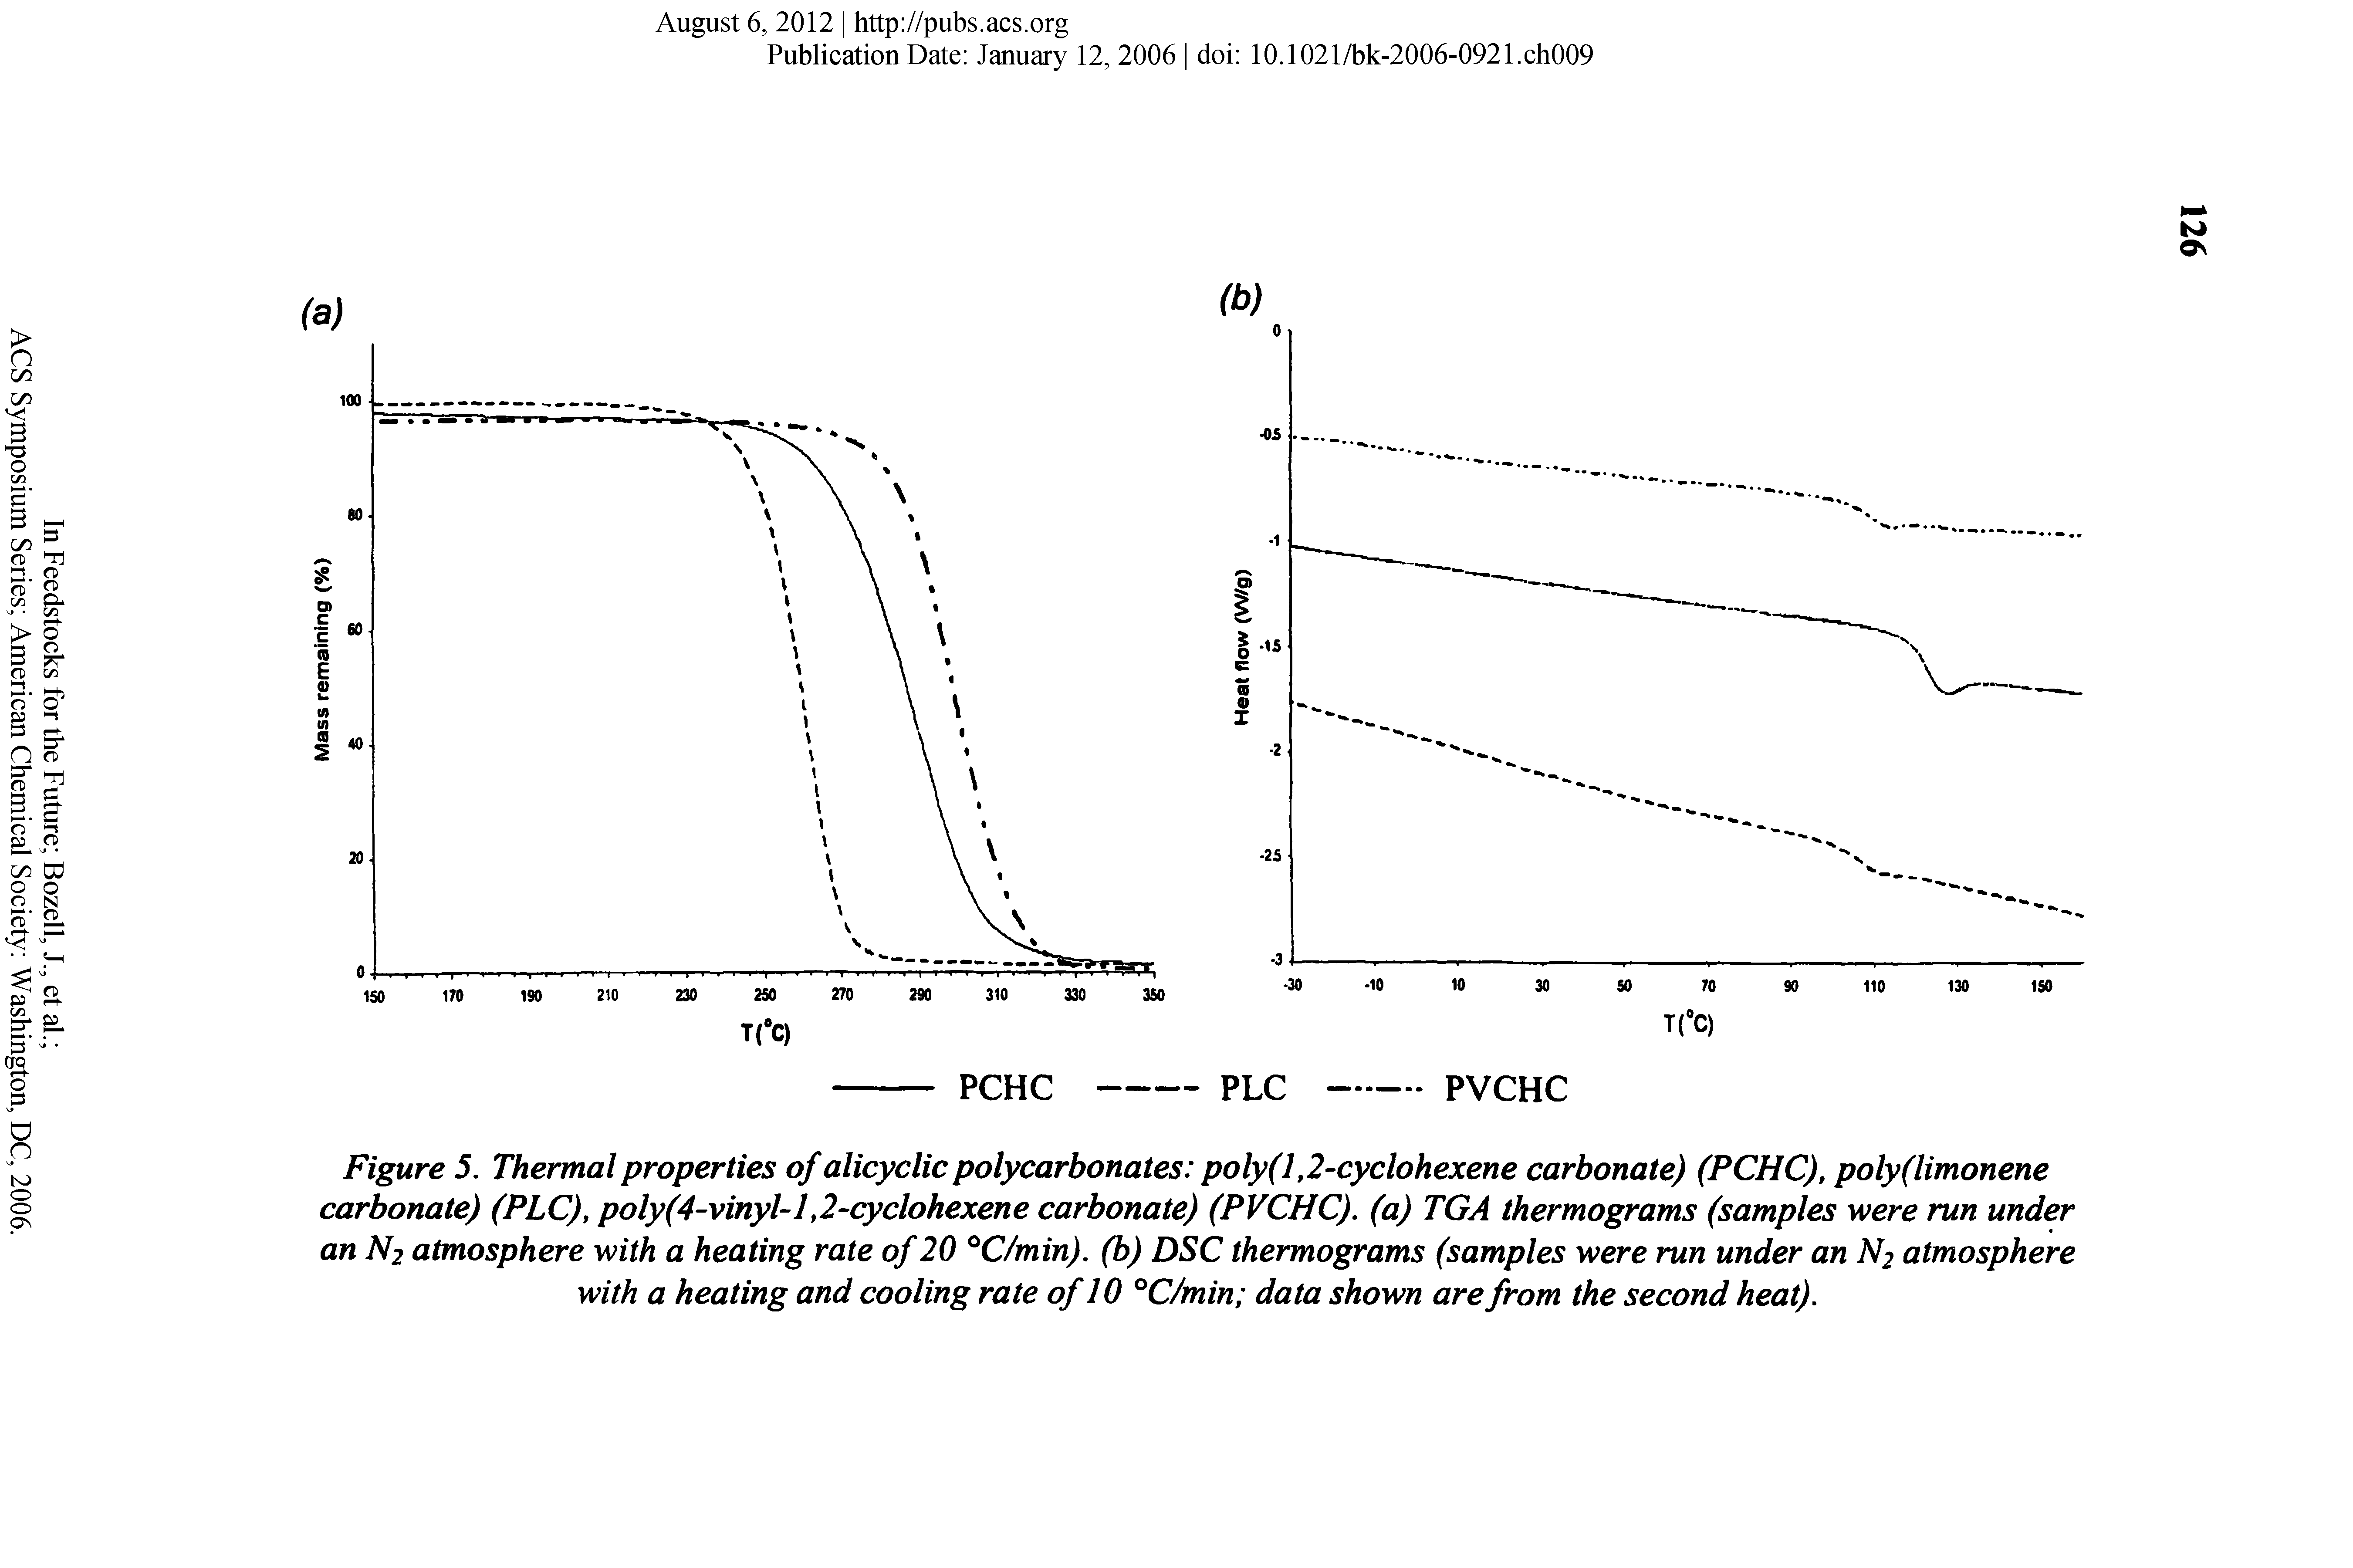 Figure 5, Thermal properties of alicyclic polycarbonates poly(I J-cyclohexene carbonate) (PCHC), poly(limonene carbonate) (PLC), poly(4-vinyl- f2 cyclohexene carbonate) (PVCHC). (a) TGA thermograms (samples were run under an N2 atmosphere with a heating rate of 20 C/min). (b) DSC thermograms (samples were run under an N2 atmosphere with a heating and cooling rate of 10 C/min data shown are from the second heat).